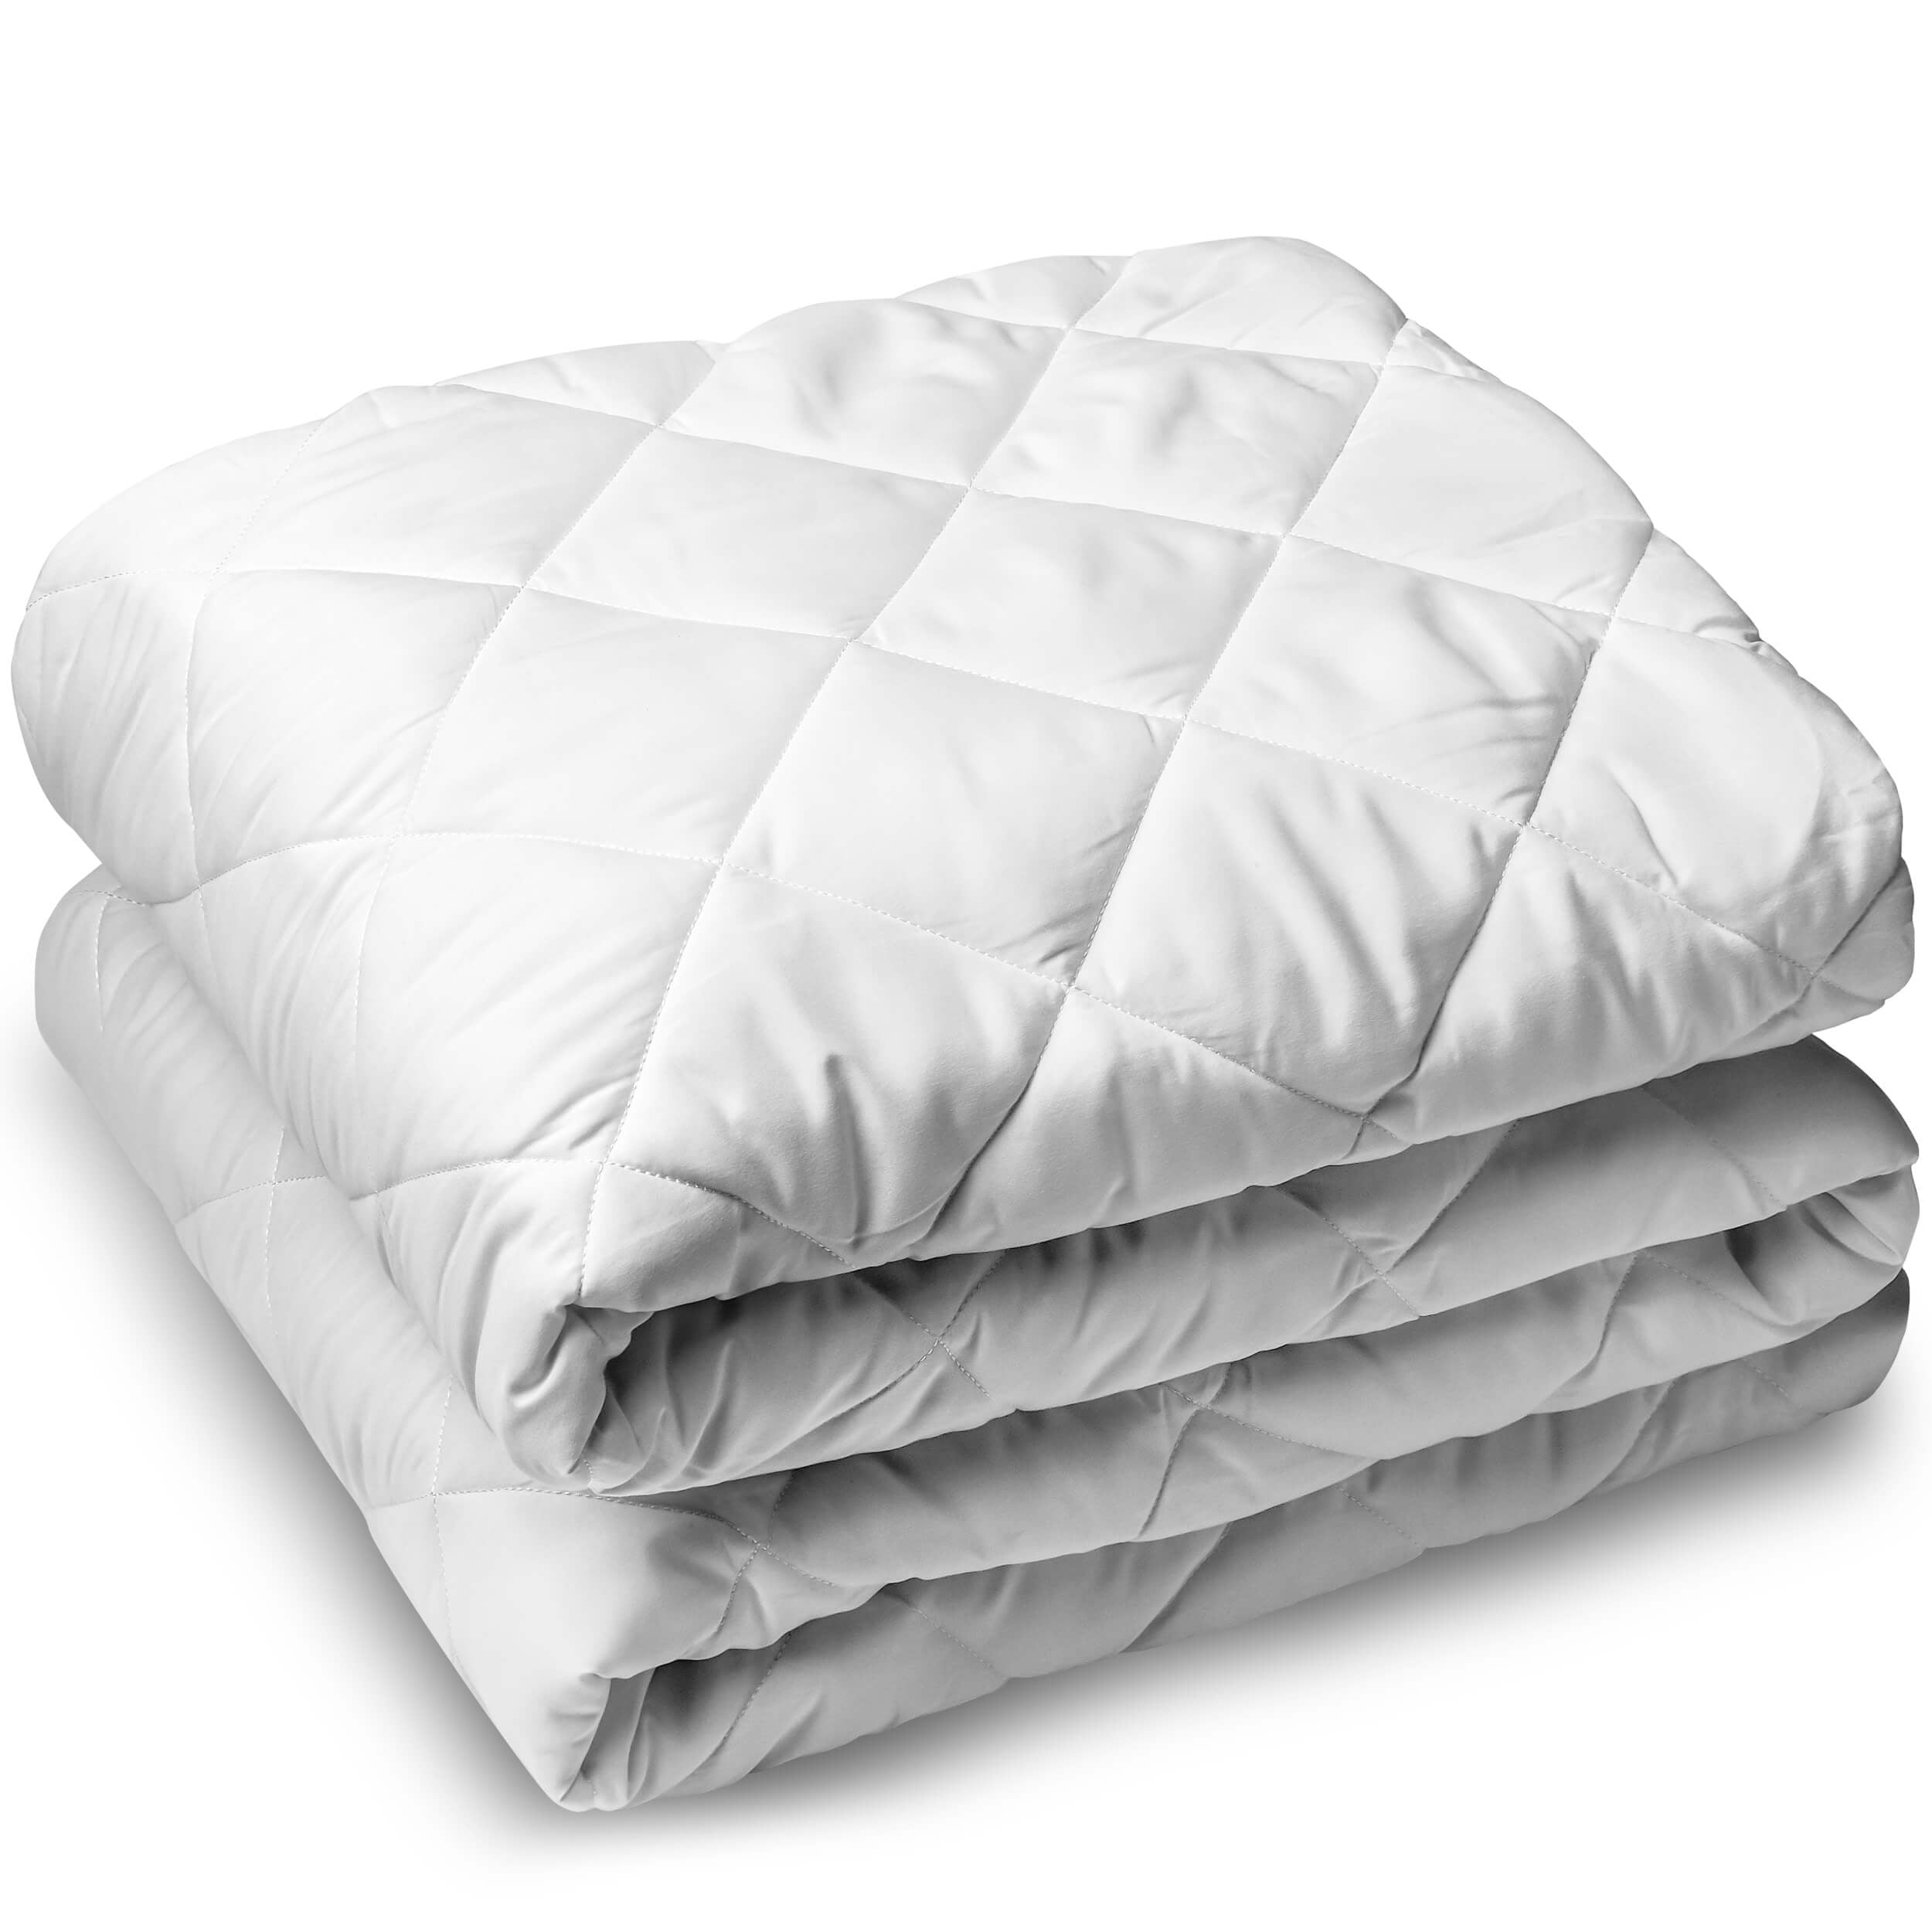 Details about   Microfiber Gray Mattress Pad Cooling Quilted Fluffy Soft Topper Deep Pocket New 